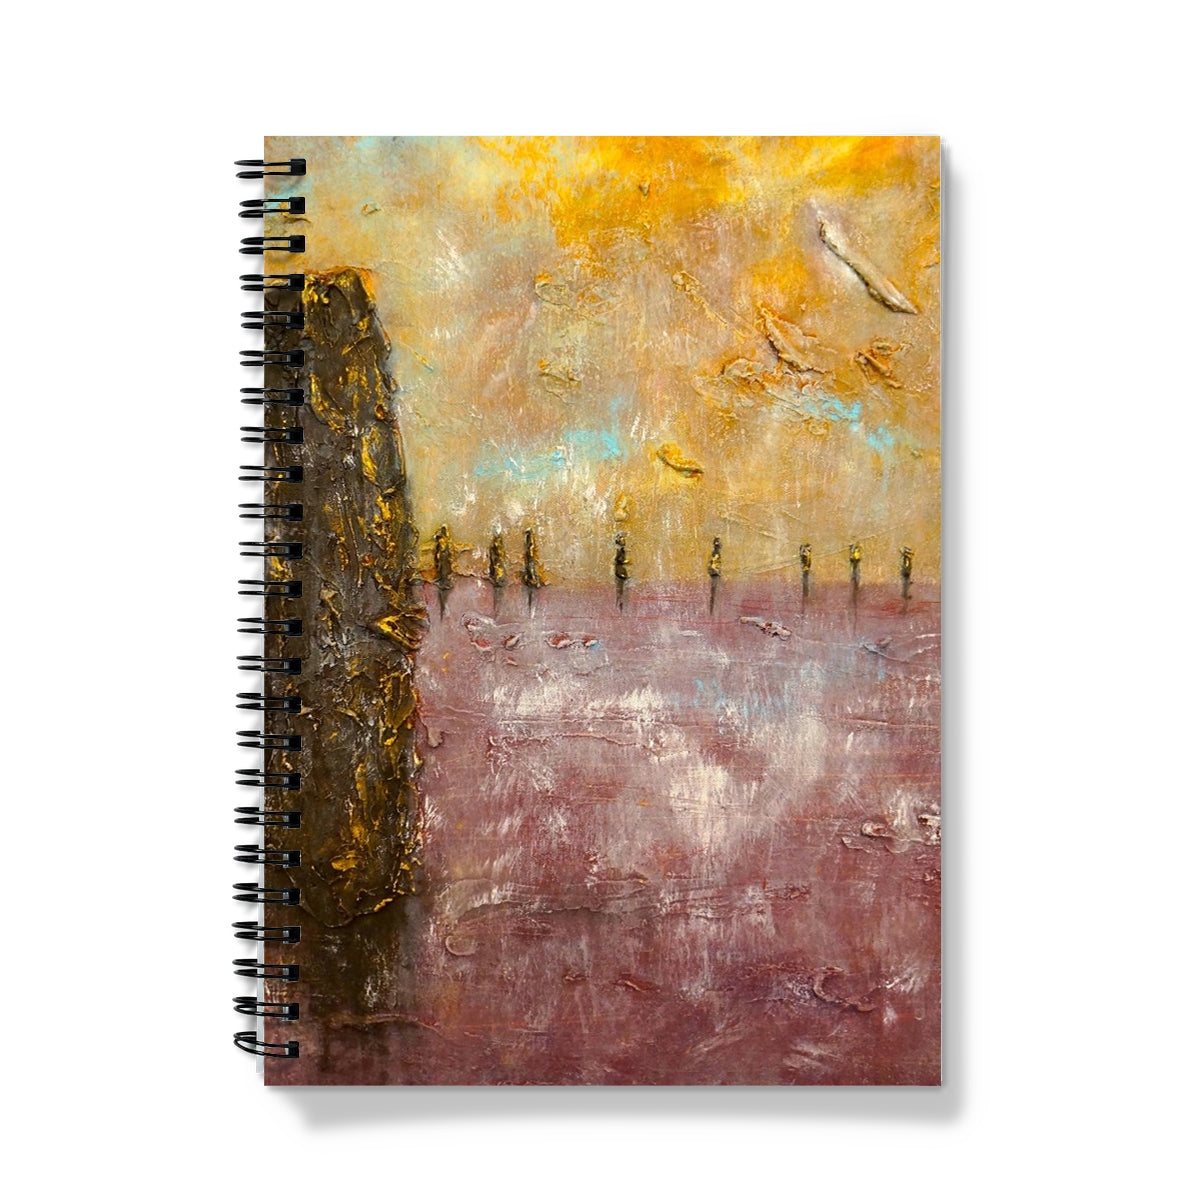 Brodgar Mist Orkney Art Gifts Notebook-Journals & Notebooks-Orkney Art Gallery-A5-Graph-Paintings, Prints, Homeware, Art Gifts From Scotland By Scottish Artist Kevin Hunter